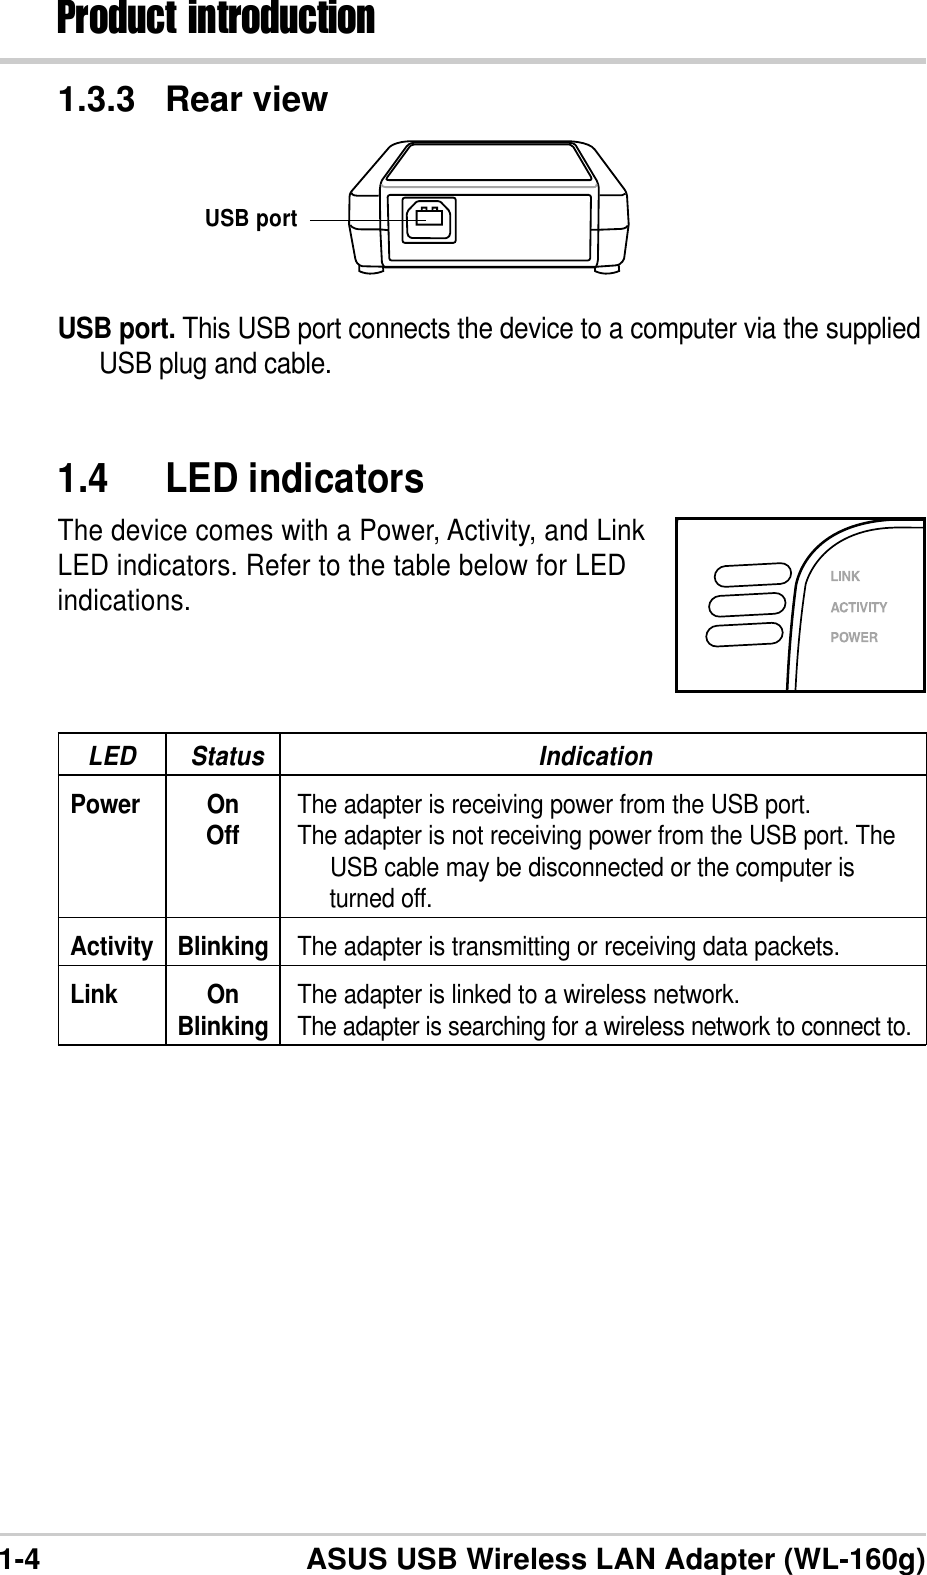 1-4 ASUS USB Wireless LAN Adapter (WL-160g)Product introduction1.4 LED indicatorsThe device comes with a Power, Activity, and LinkLED indicators. Refer to the table below for LEDindications.1.3.3 Rear viewUSB port. This USB port connects the device to a computer via the suppliedUSB plug and cable.LED Status IndicationPower On The adapter is receiving power from the USB port.Off The adapter is not receiving power from the USB port. The     USB cable may be disconnected or the computer is     turned off.Activity Blinking The adapter is transmitting or receiving data packets.Link On The adapter is linked to a wireless network.Blinking The adapter is searching for a wireless network to connect to.USB port